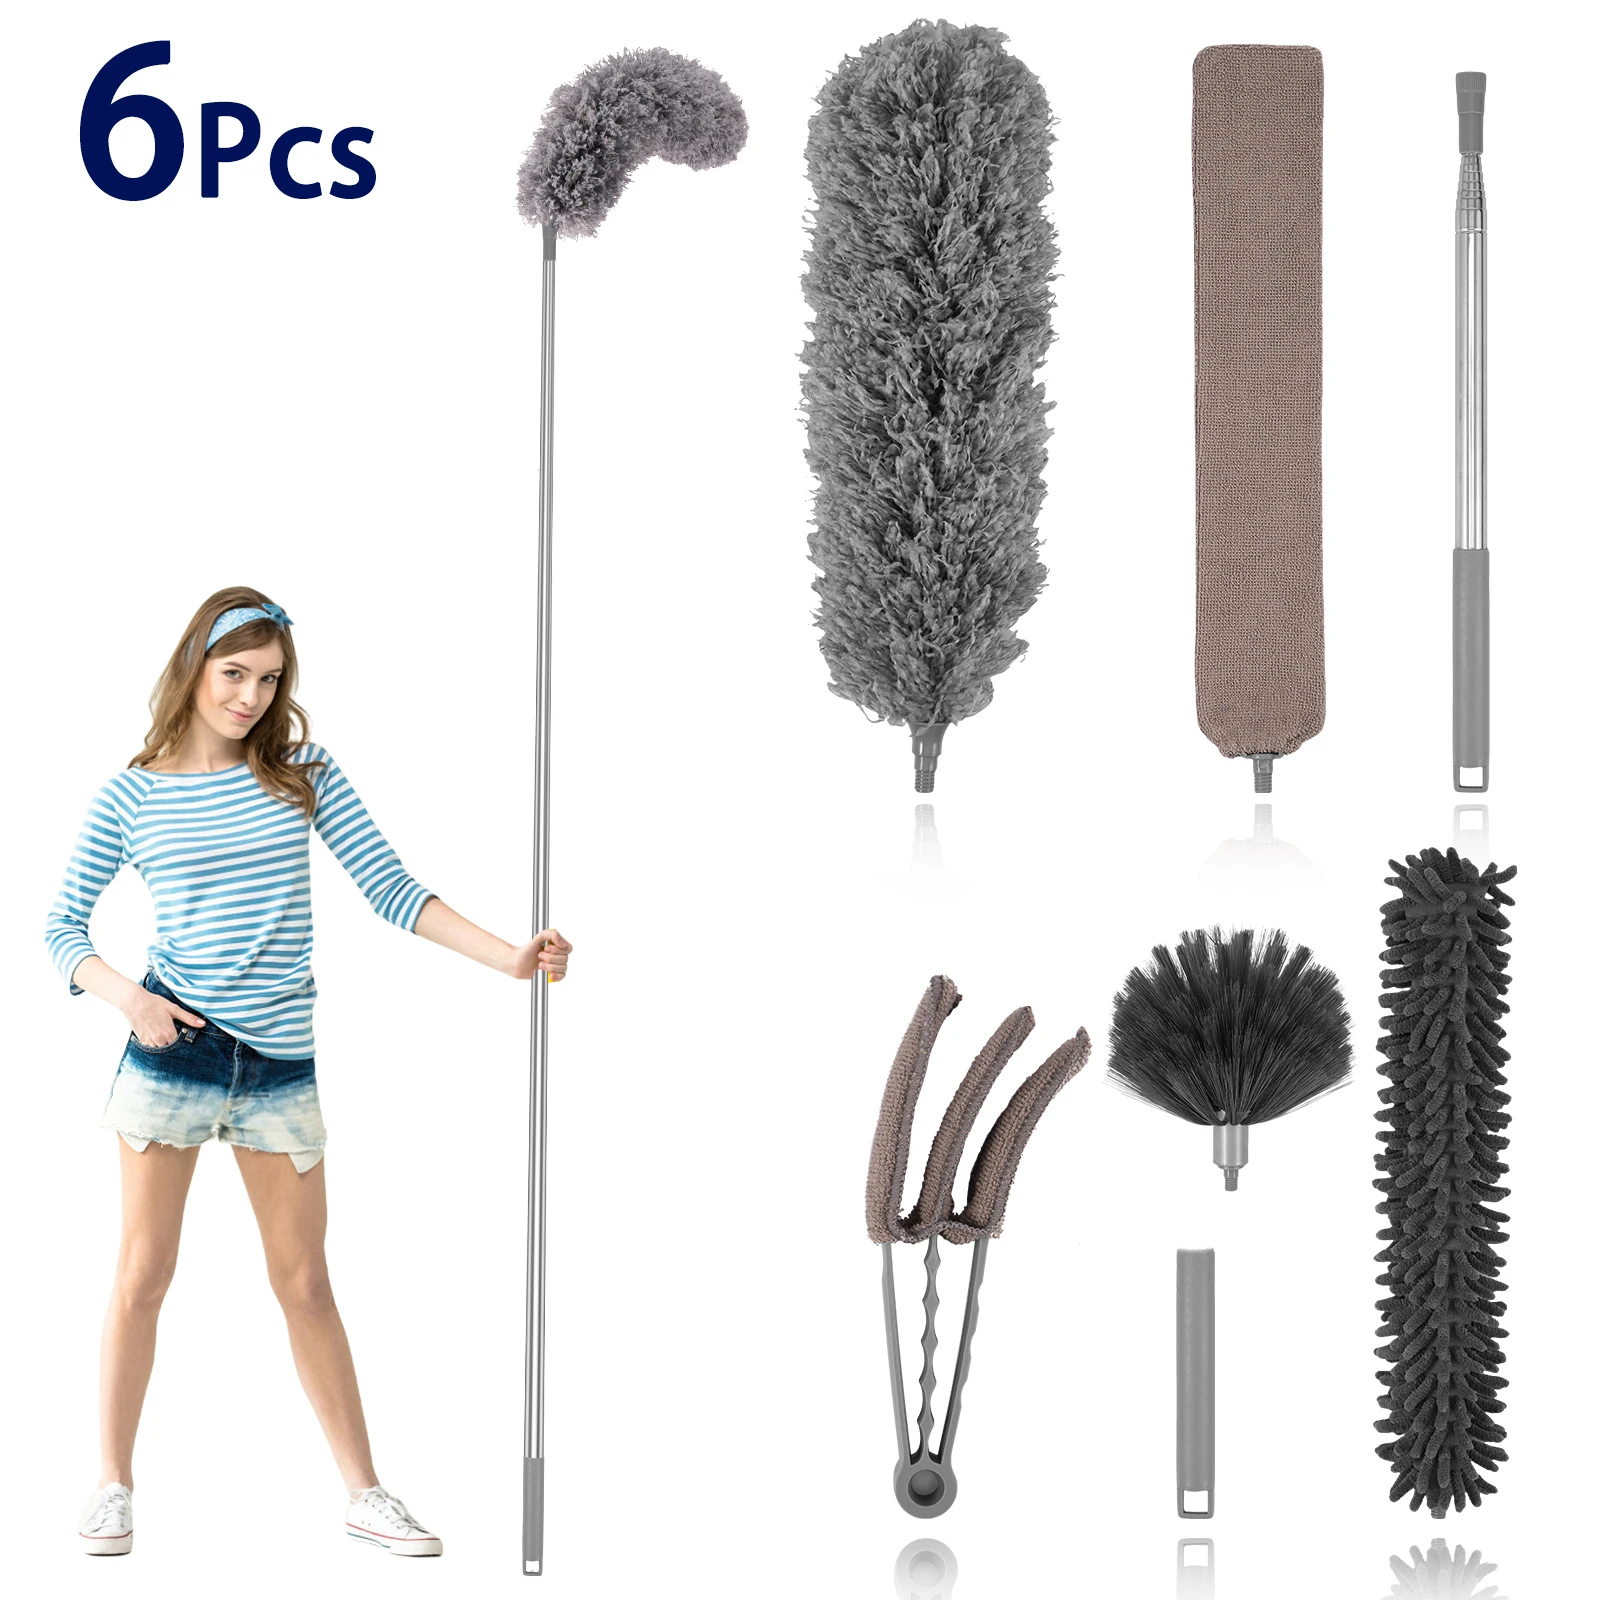 Flexible Fan Dusting Brush-Non-Disassembly Cleaning Electric Fan Dust Brush